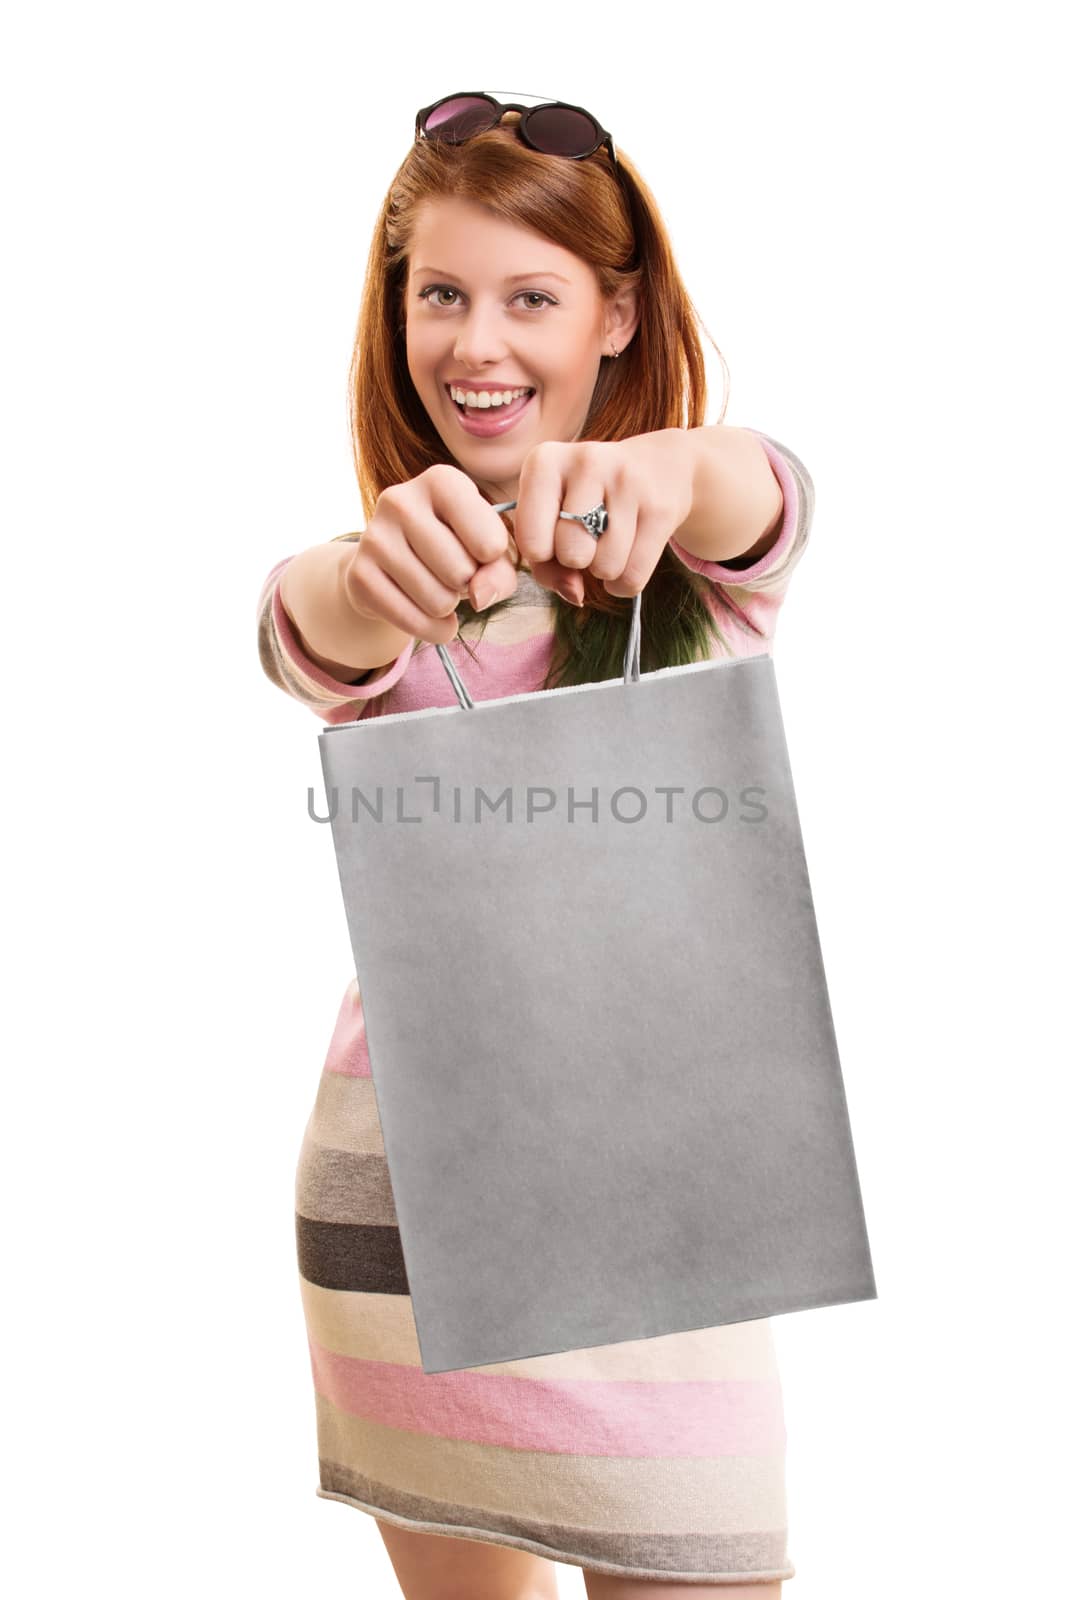 A portrait of a beautiful smiling girl, holding a shopping bag in front of her, isolated on white background.